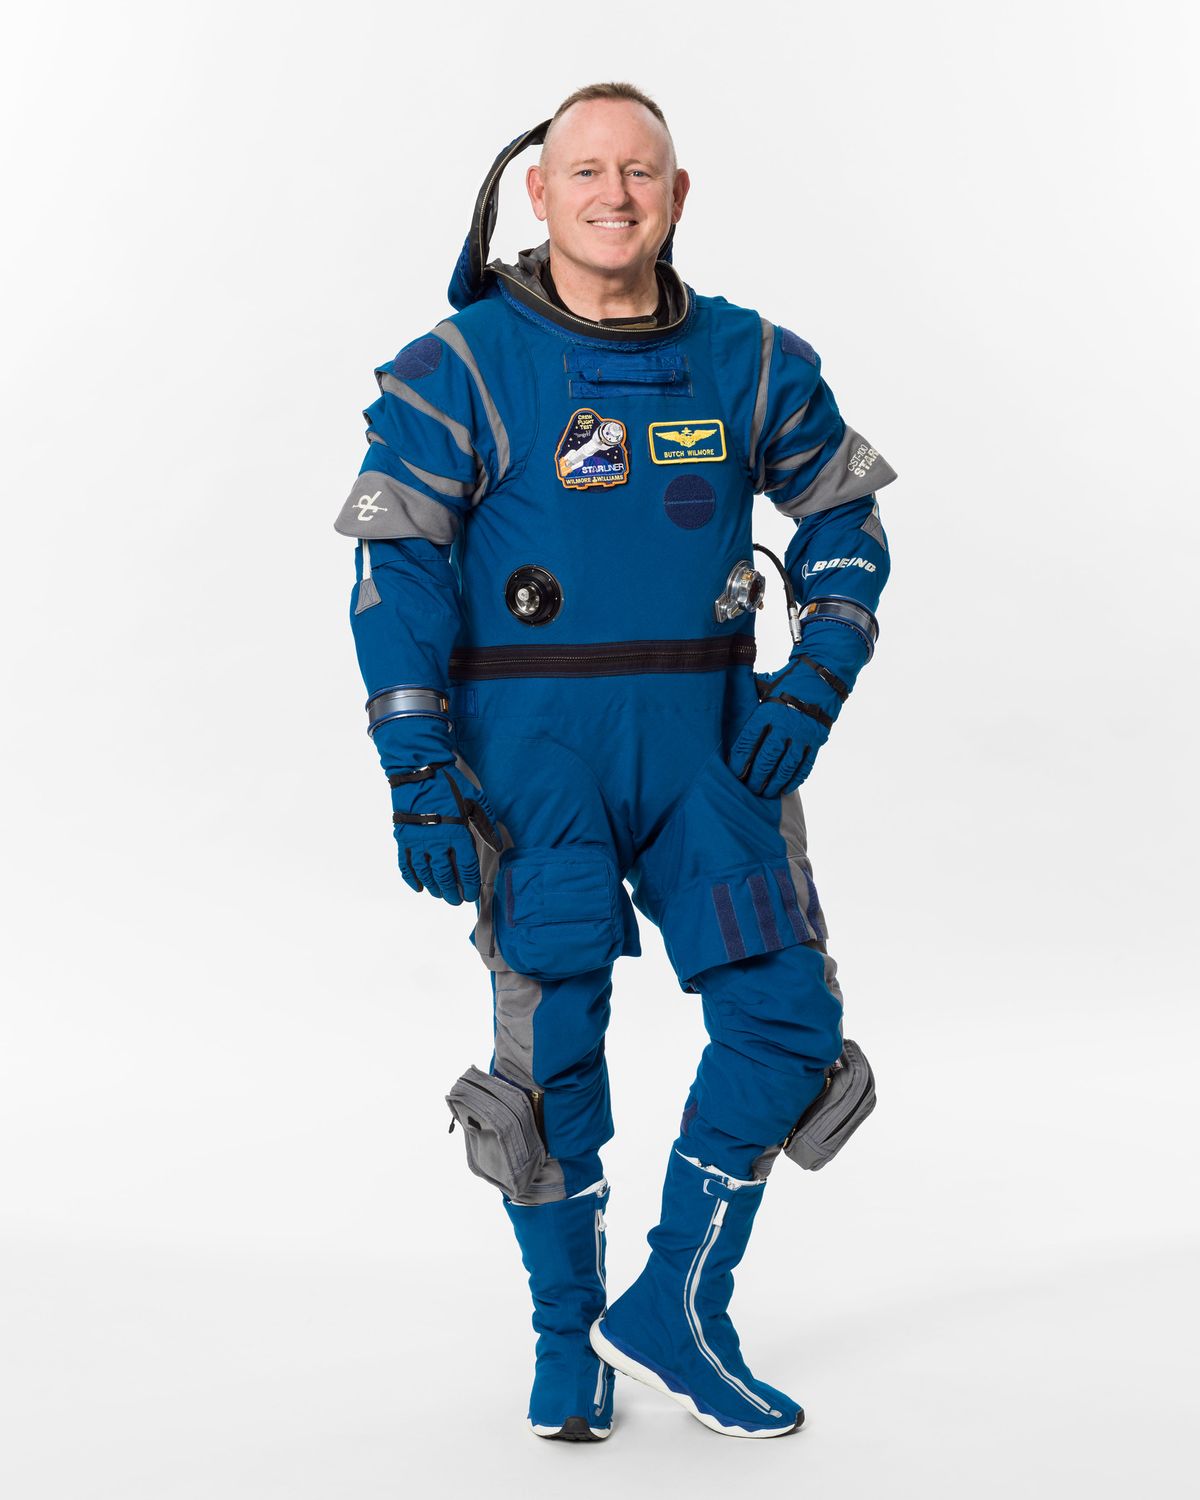 NASA astronaut and Tennessee Tech alumnus Barry “Butch” Wilmore is photographed at NASA’s Johnson Space Center in Houston, Texas. Photo by Robert Markowitz/NASA.